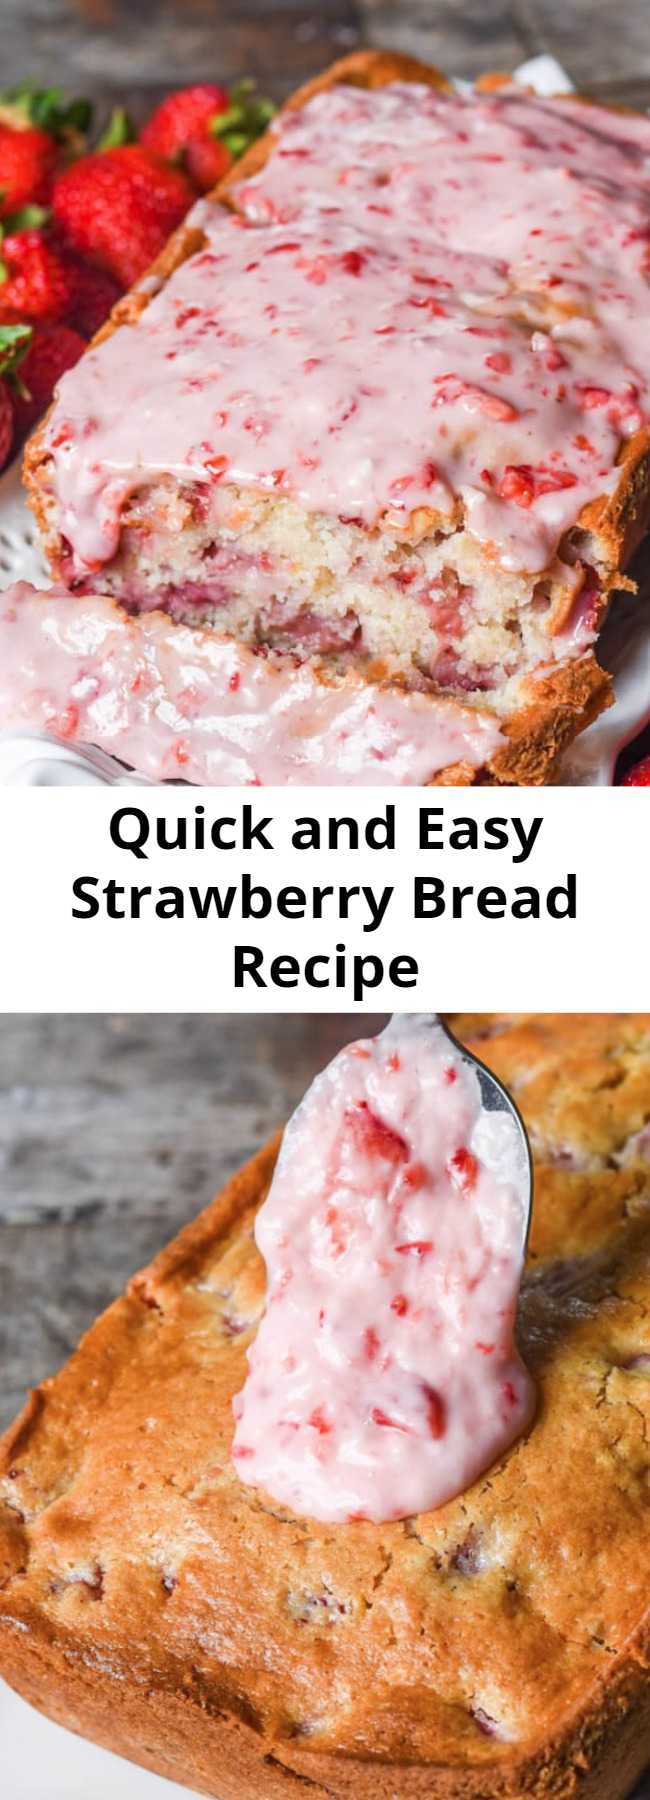 Quick and Easy Strawberry Bread Recipe - Try this fresh strawberry bread with melt-in-your-mouth strawberry glaze. This quick bread recipe comes together in just 10 minutes. If you love fruit breads, you'll also love our cherry bread!